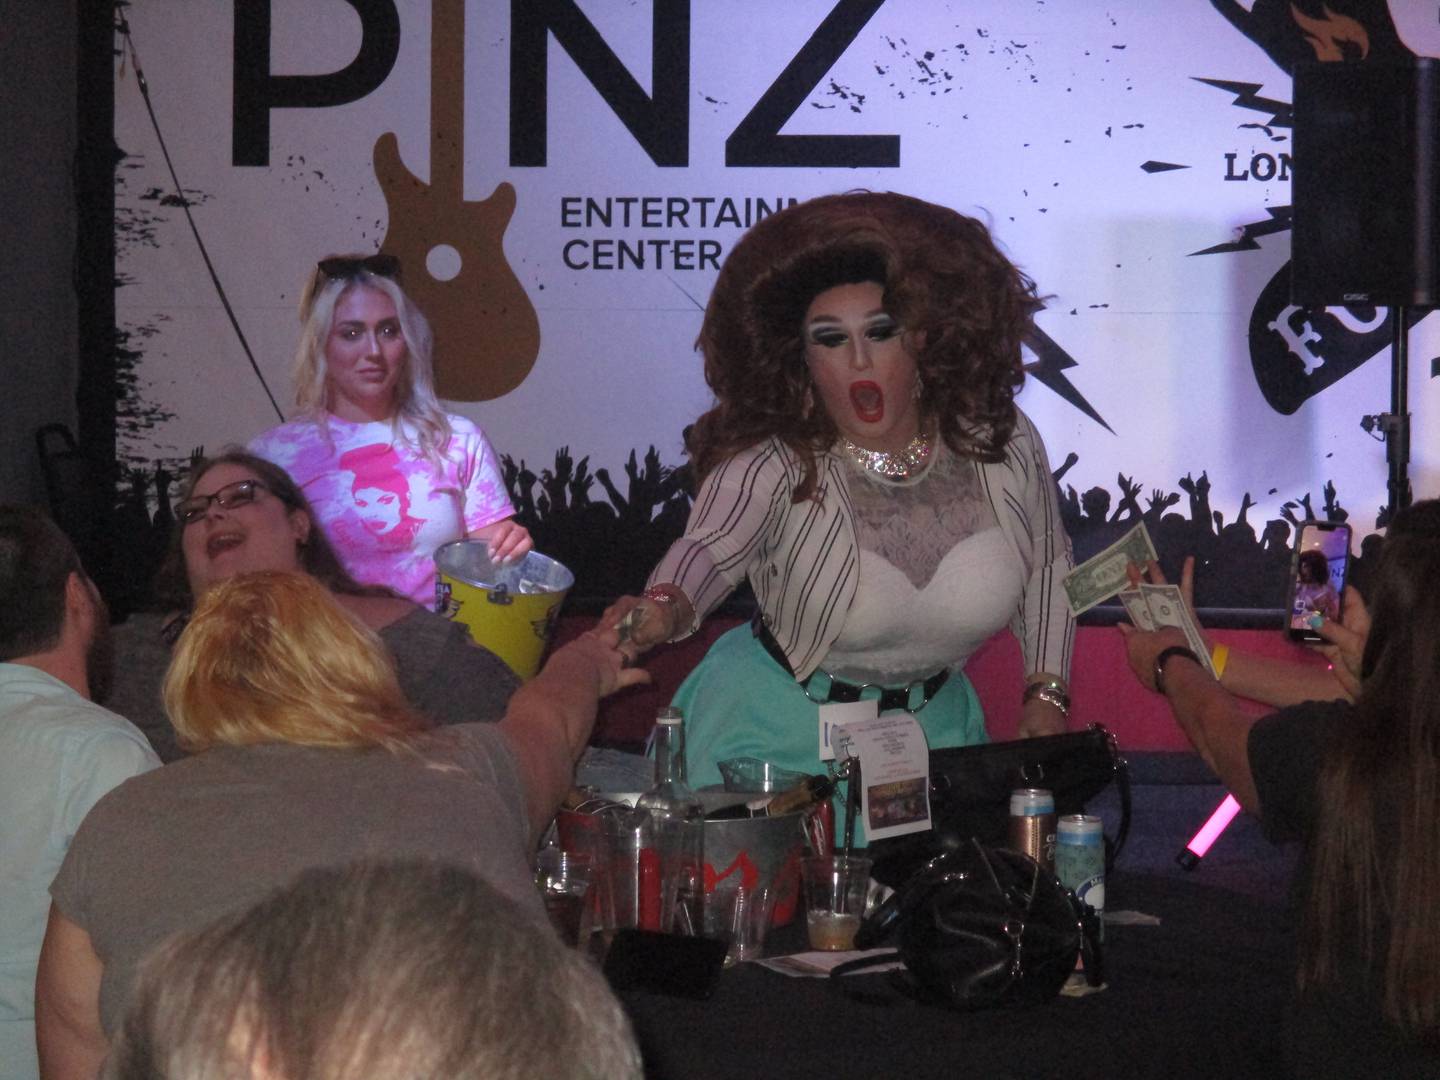 Performer Fox E. Kim receives dollar bill tips from patrons during the drag show at Pinz Entertainment Center in Yorkville on Aug. 21, 2022.